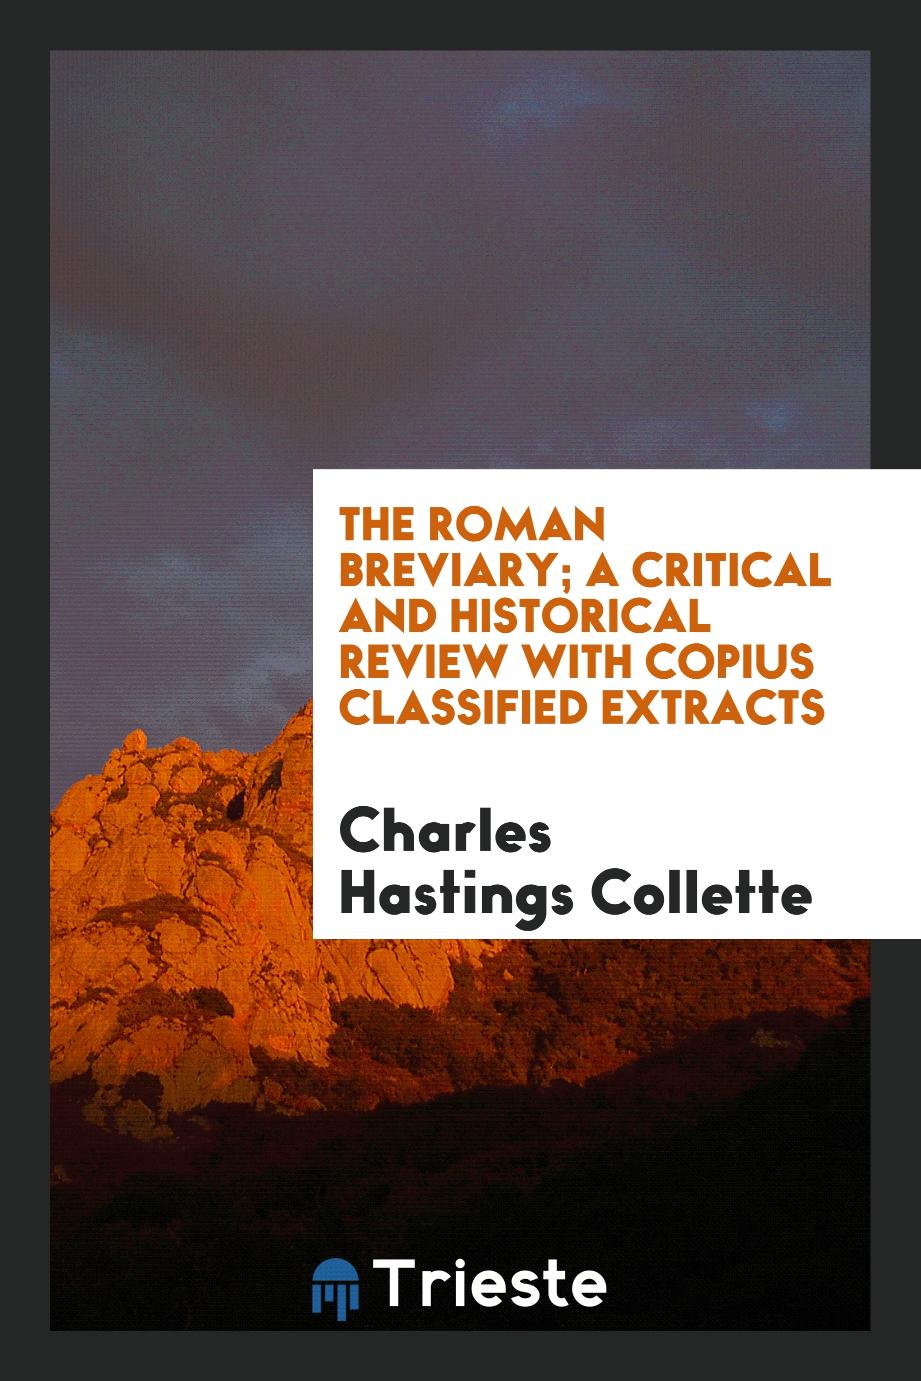 The Roman Breviary; A Critical and Historical Review with Copius Classified Extracts